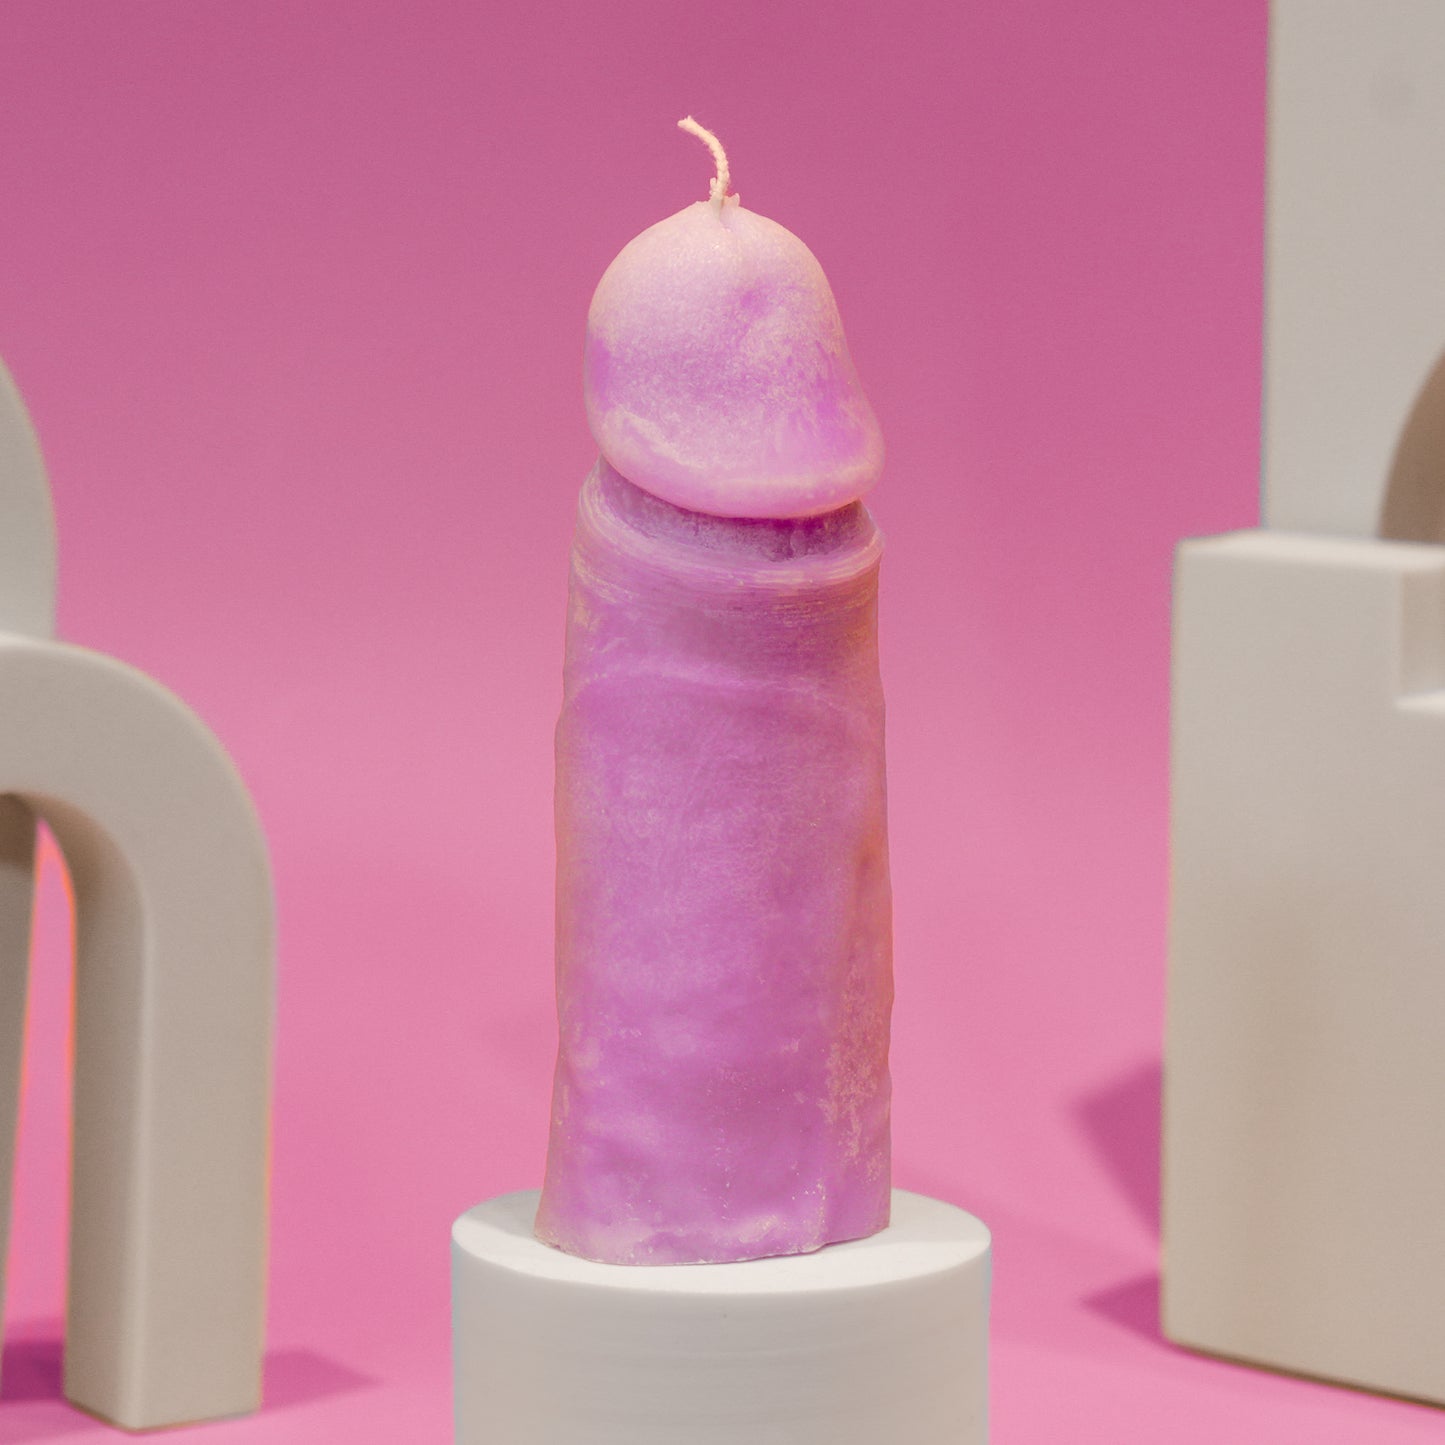 Realistic Giggeli penis candle from Helsinki, showcasing body diversity and promoting self-acceptance